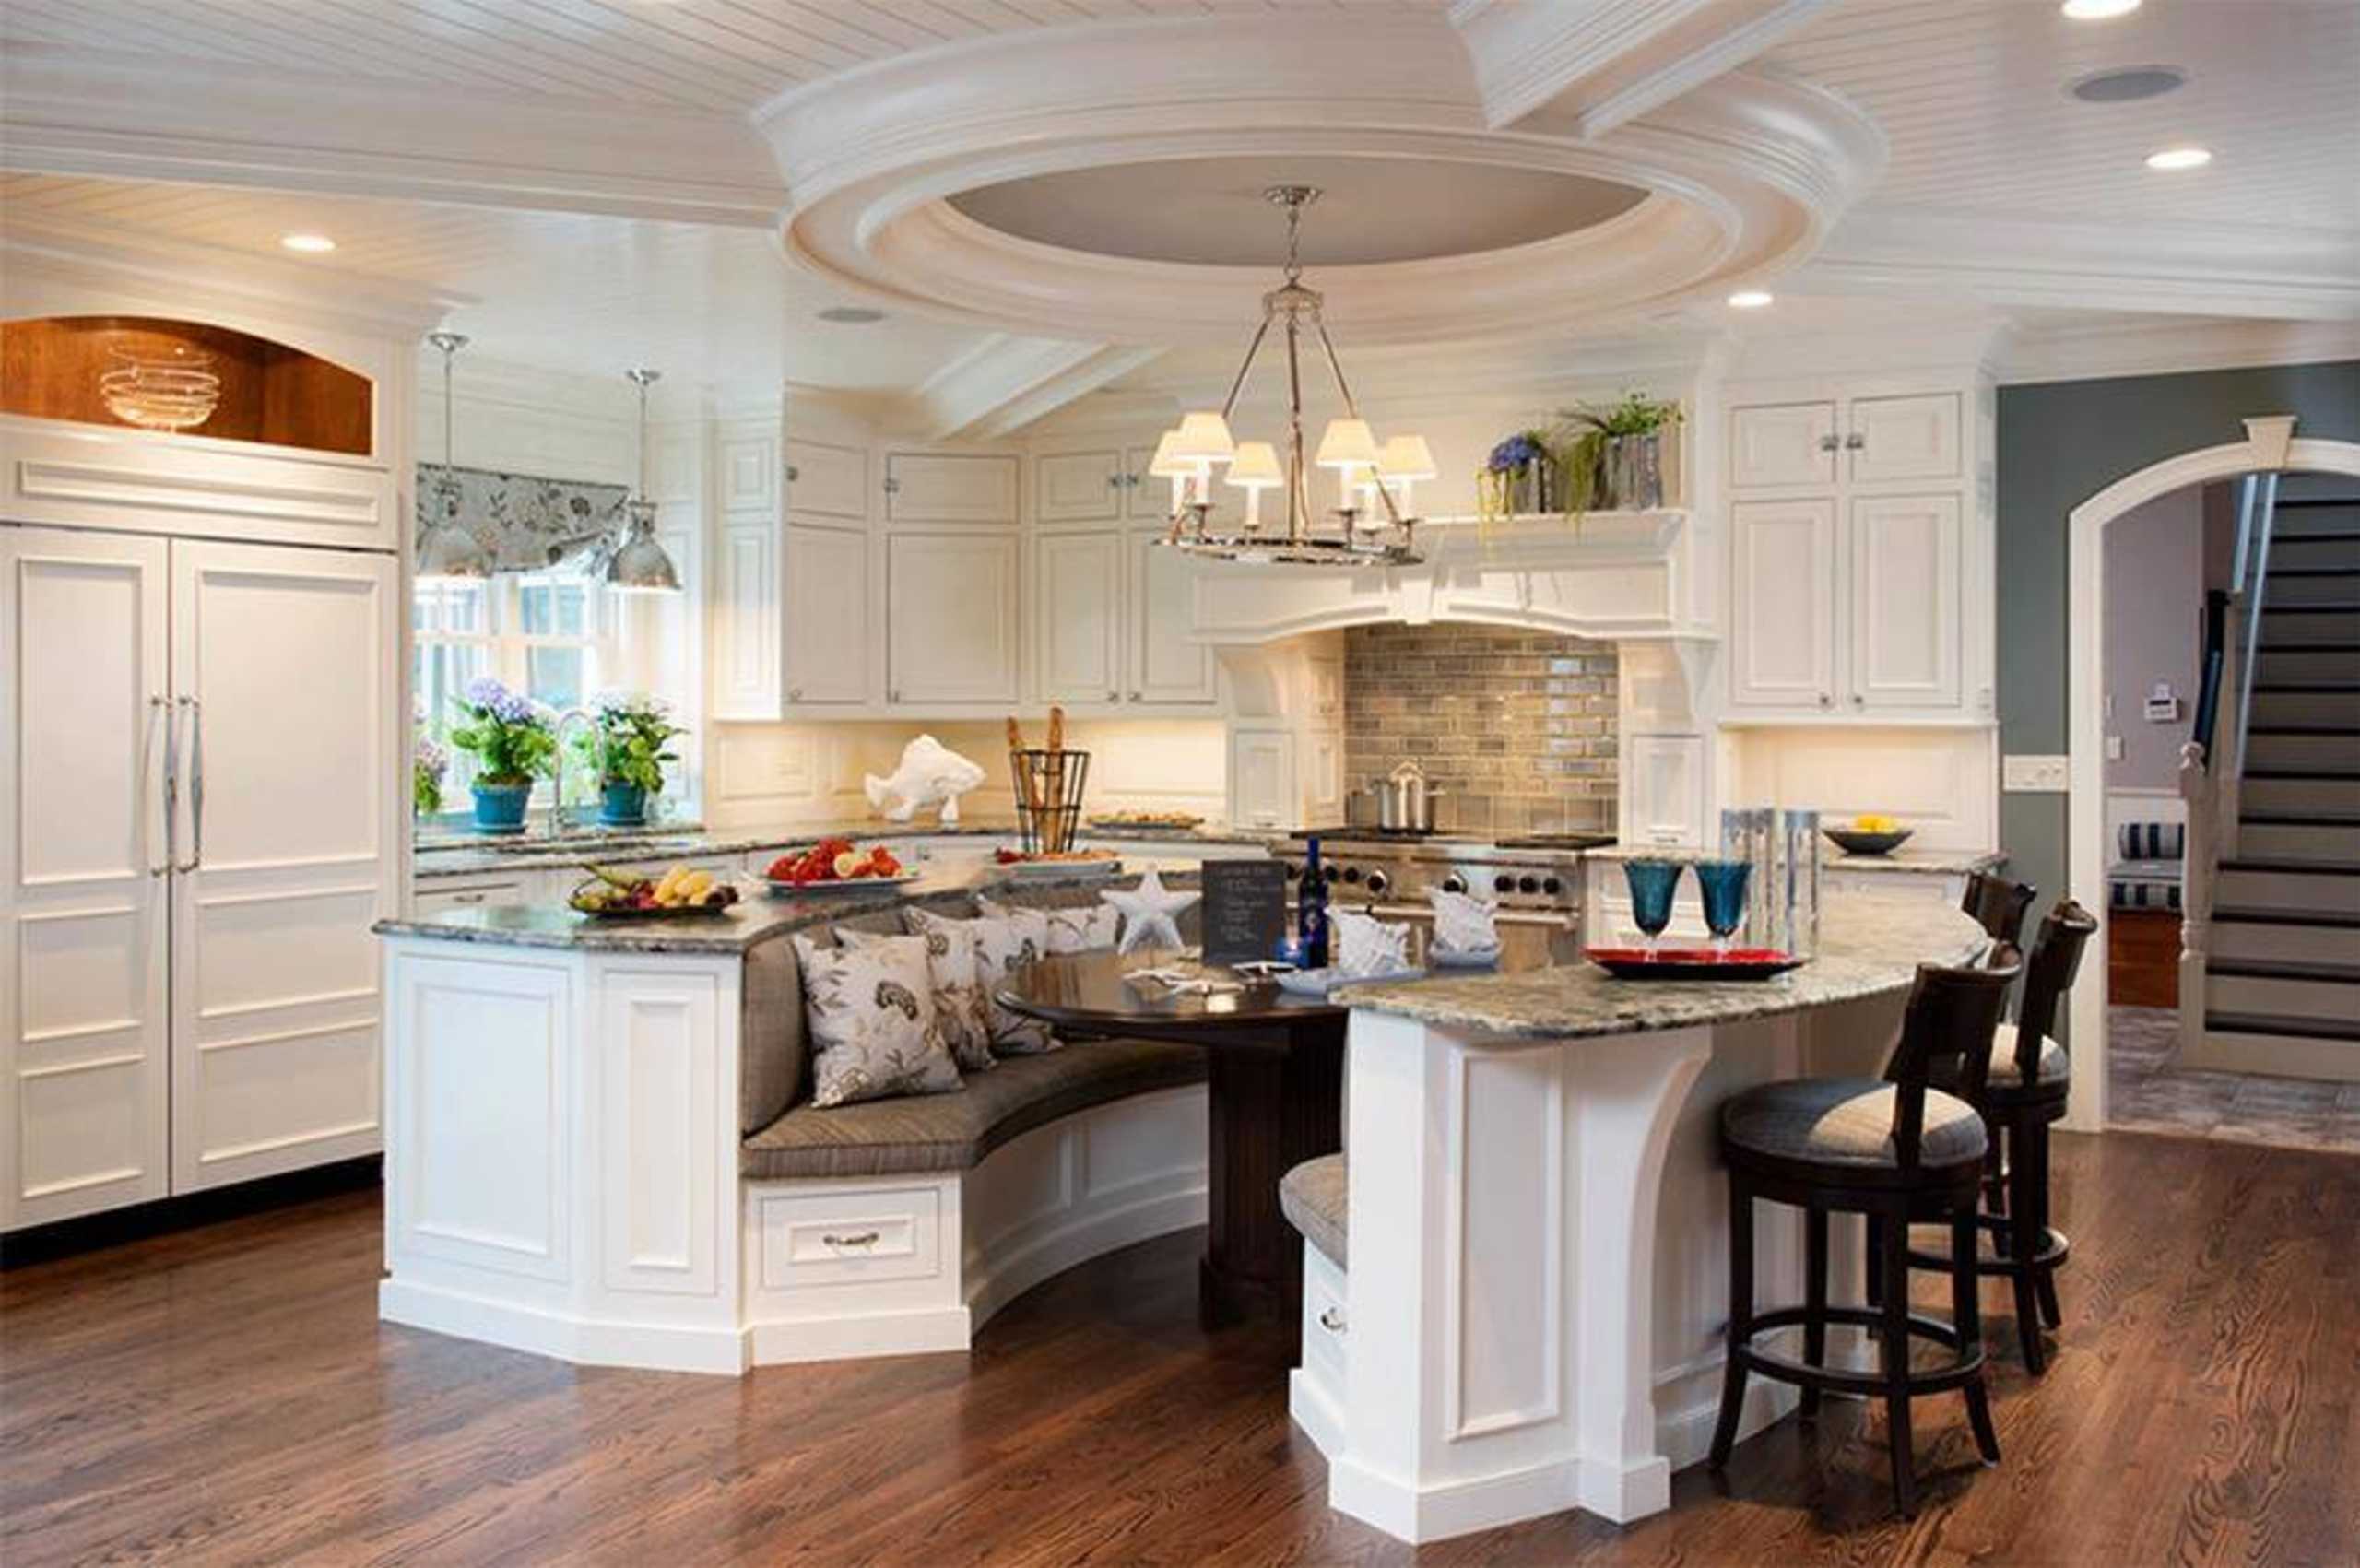 Kitchens are the heart of the home